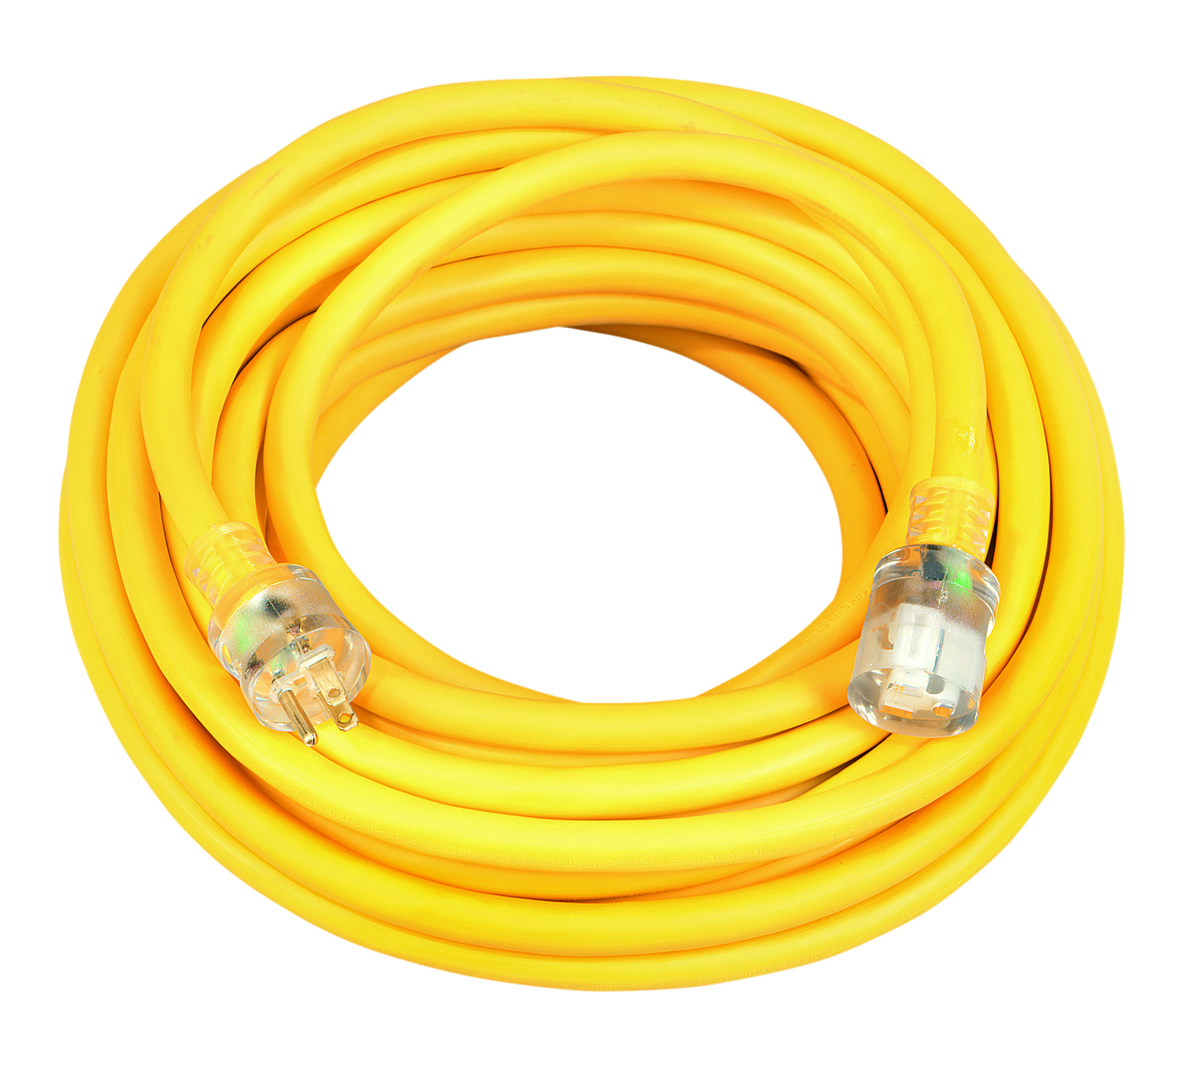 SOUTHWIRE, 10/3 SJTW 100' YELLOW OUTDOOR EXTENSION CORD WITH POWER